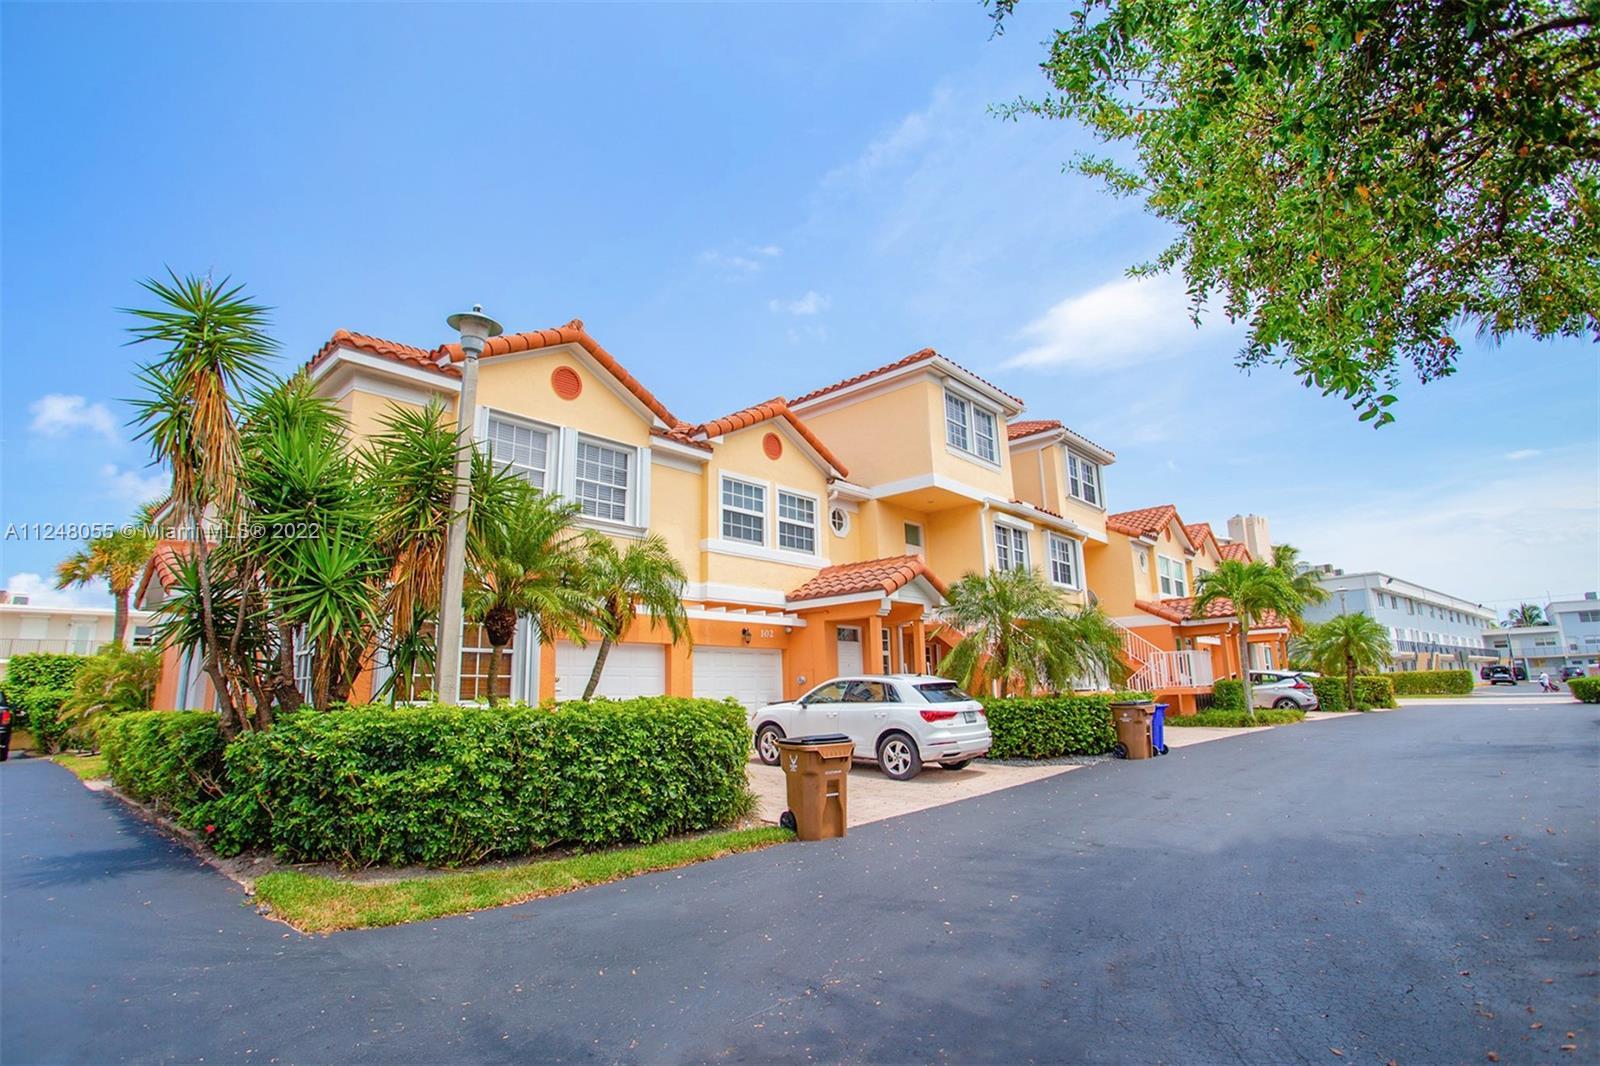 Location! Townhome tri level With the best Location. Situated between the intracoastal waterway wher